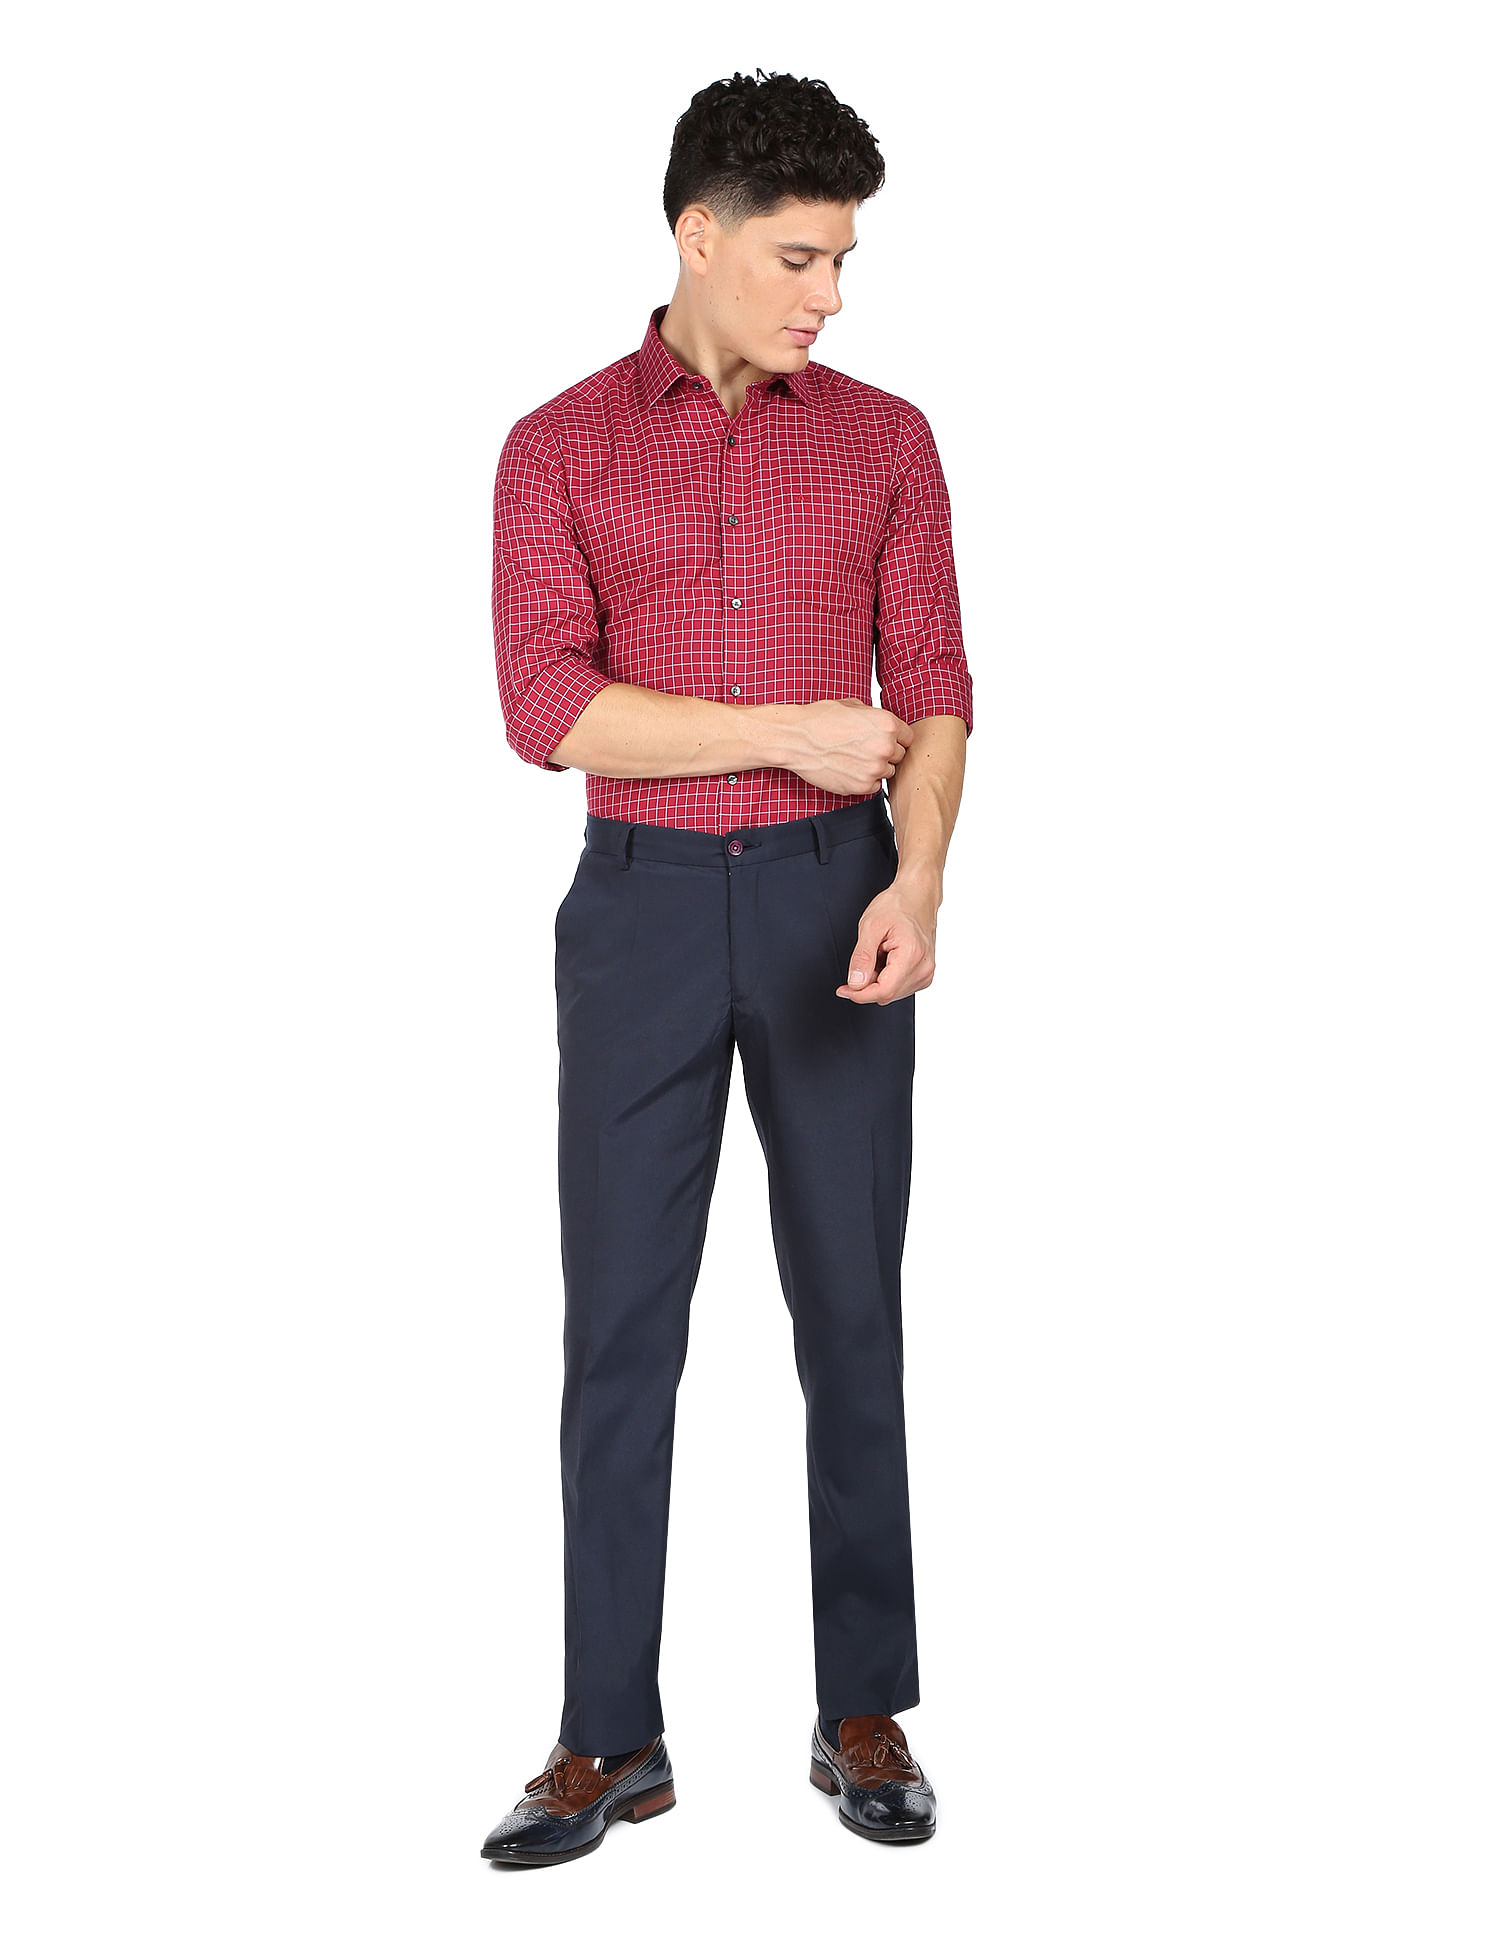 Can I wear a blue shirt with red pants? - Quora